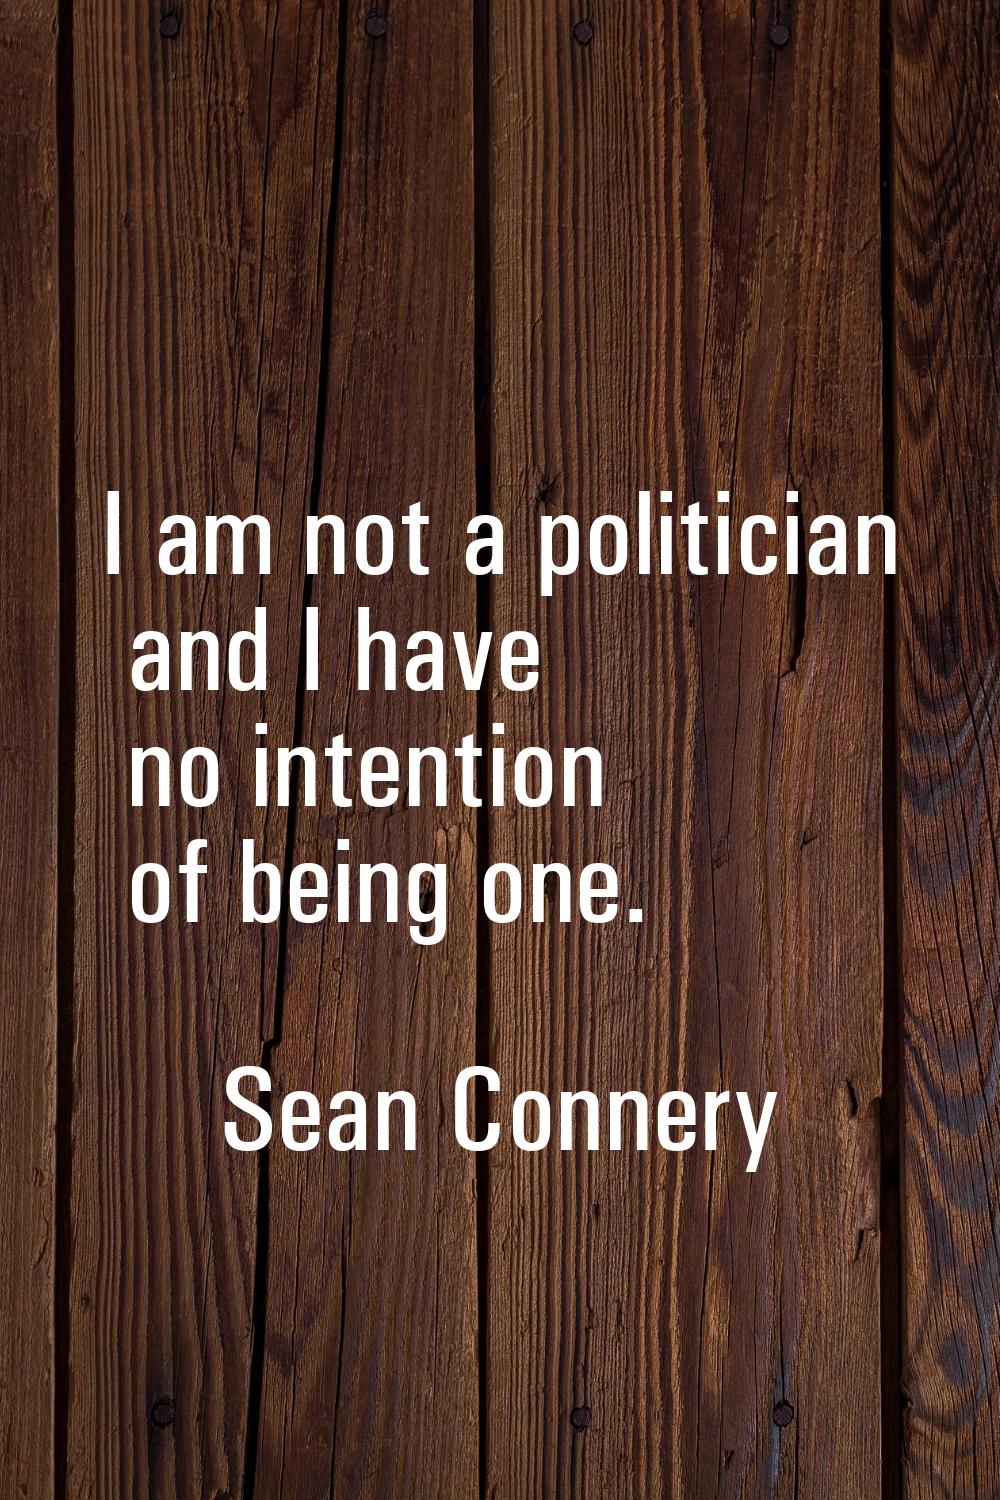 I am not a politician and I have no intention of being one.